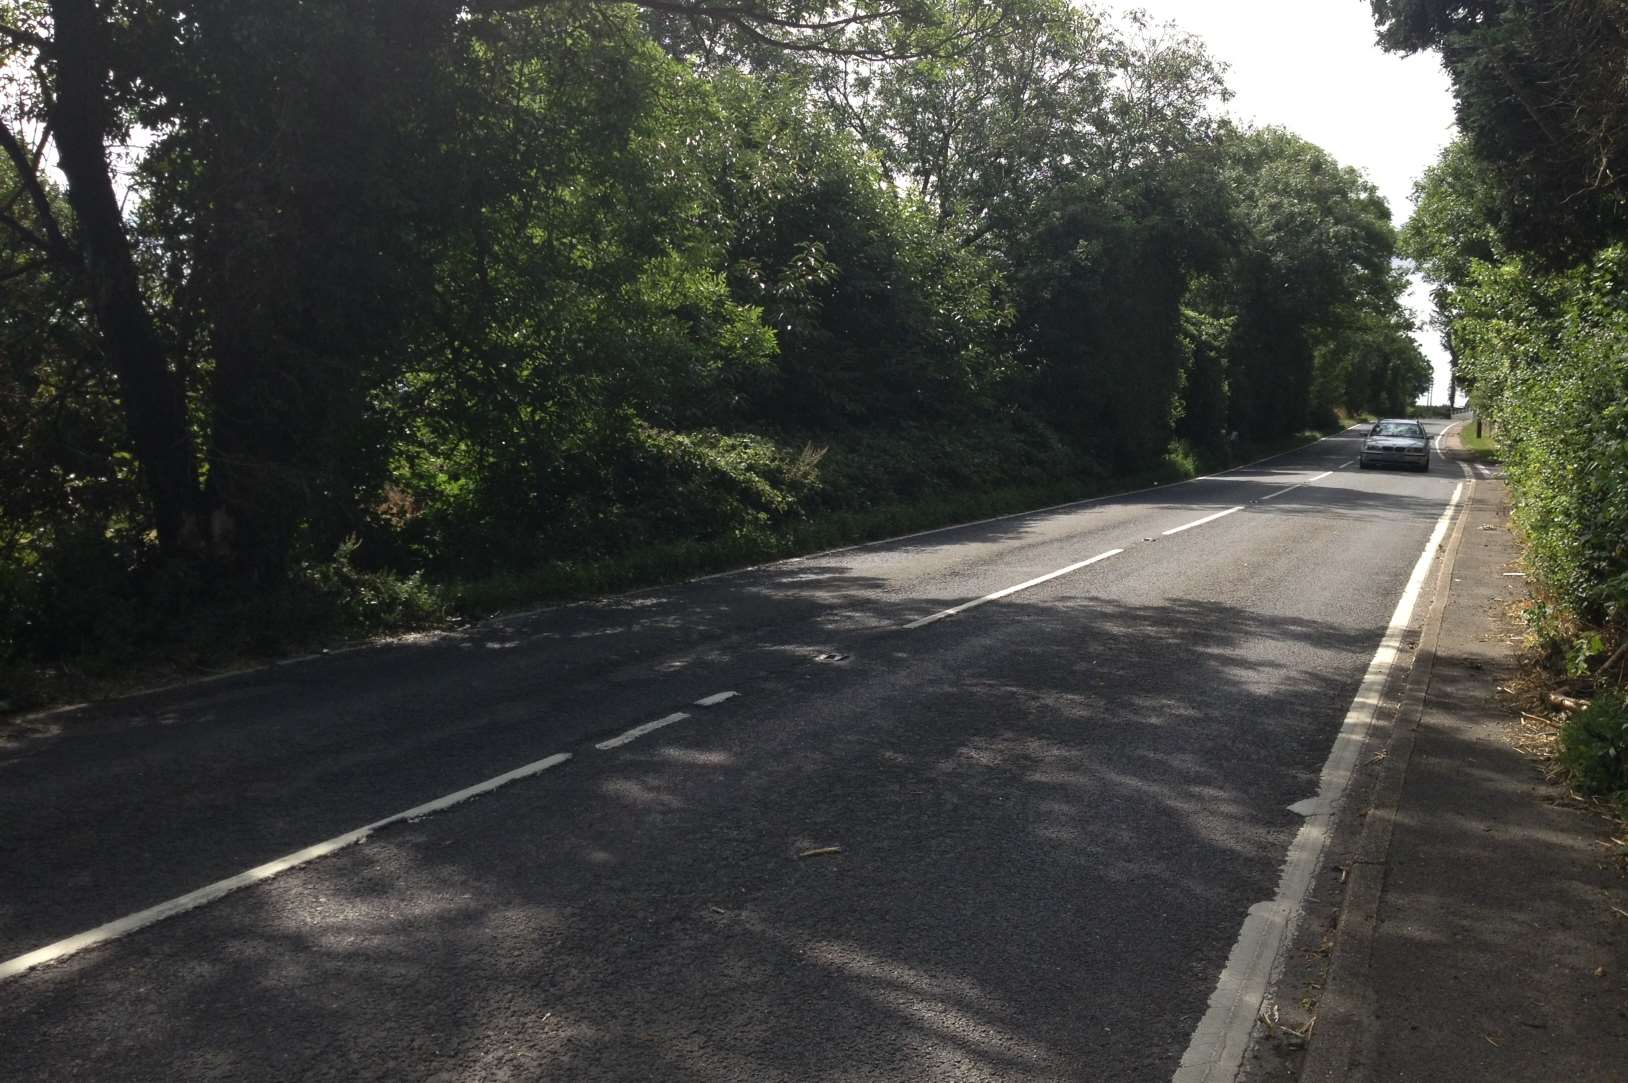 The road where the crash happened in Faversham